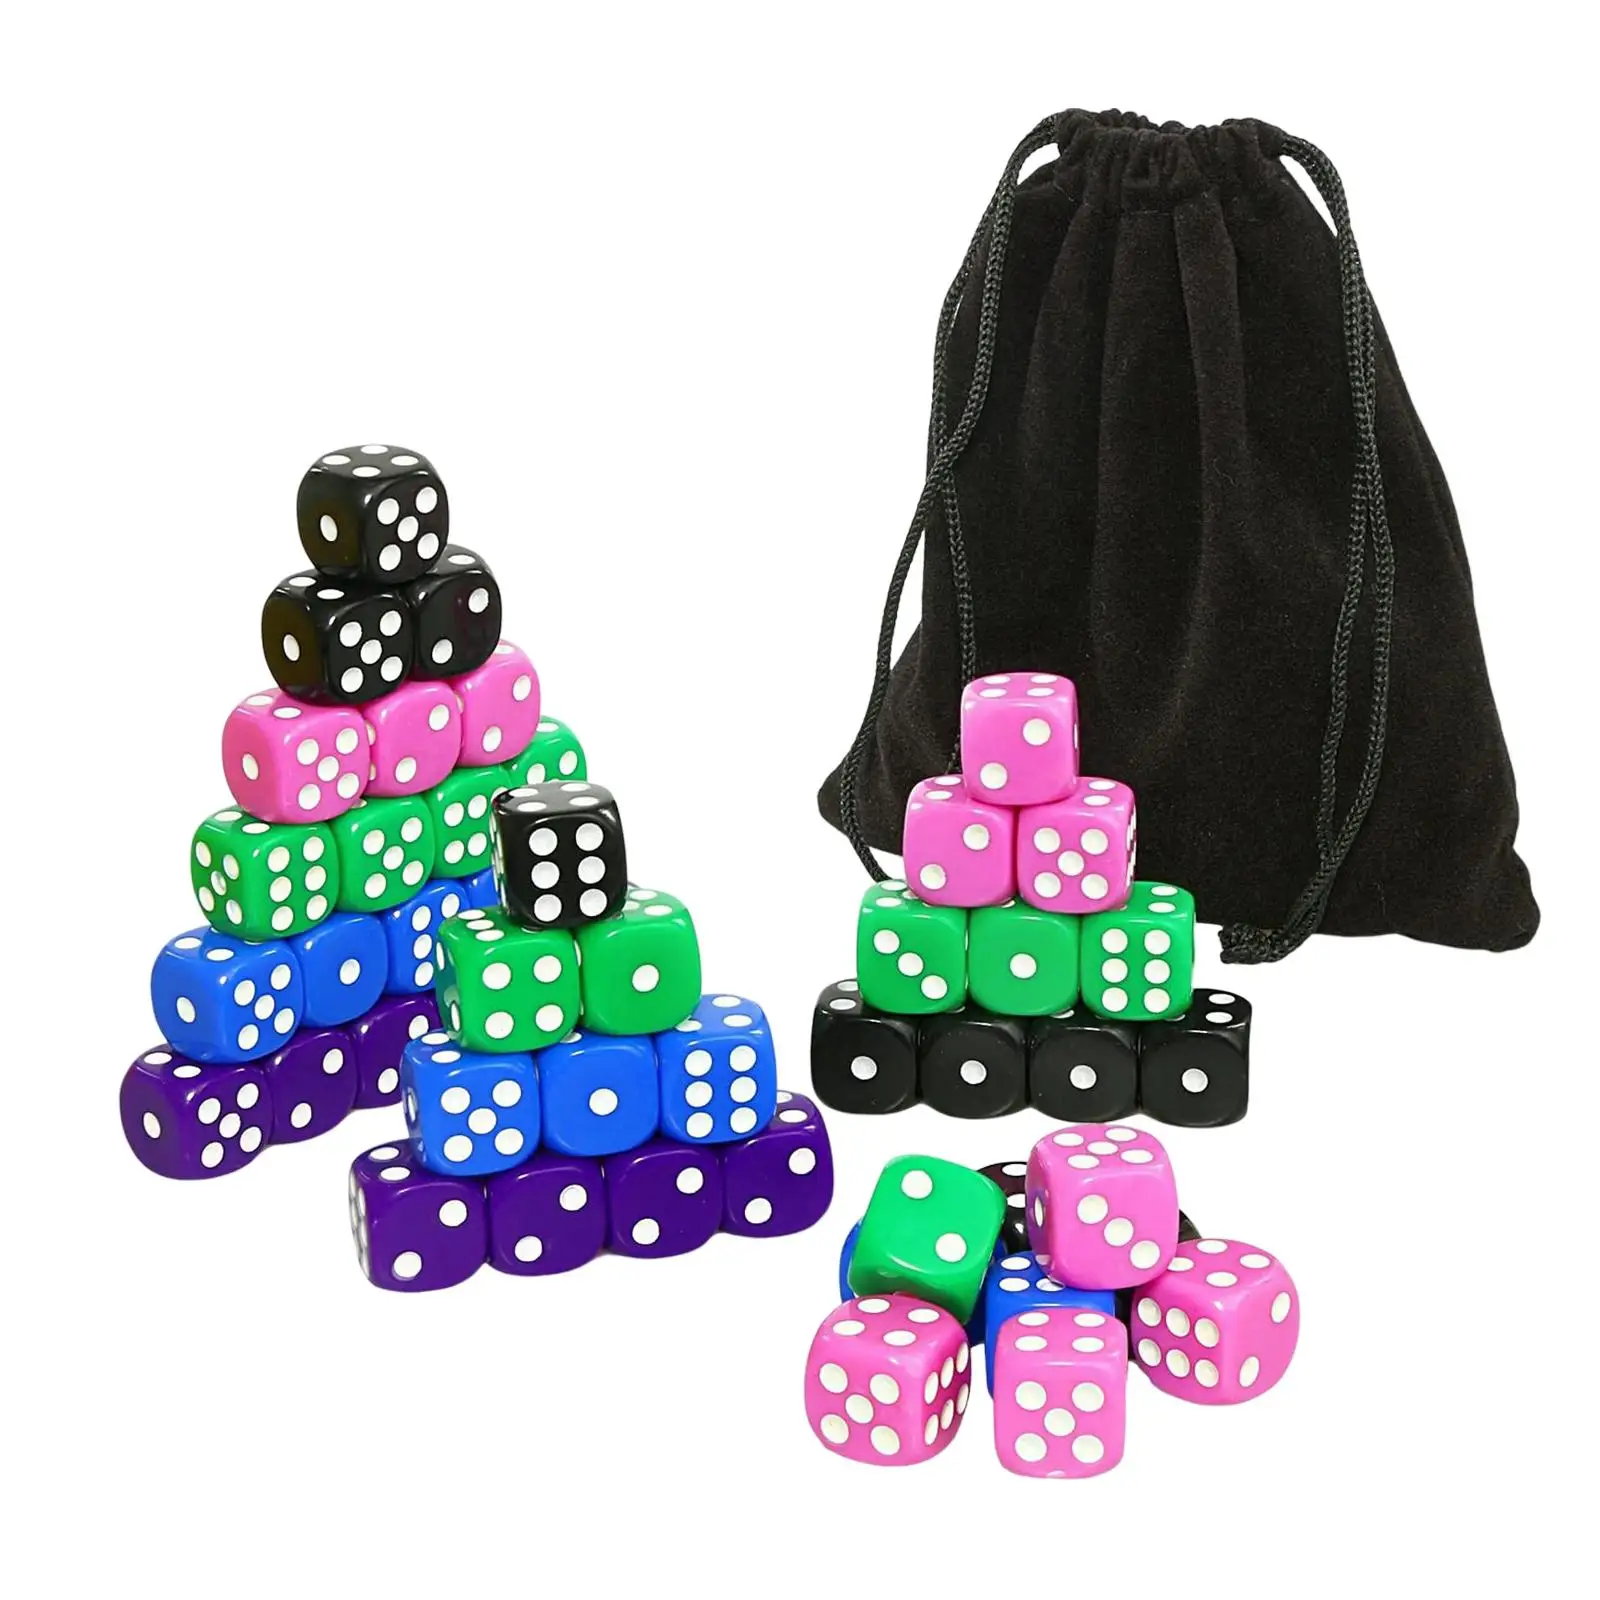 50x Six Sided Dices Set with Velvet Pouch for MTG 16mm Acrylic Dice Board Game